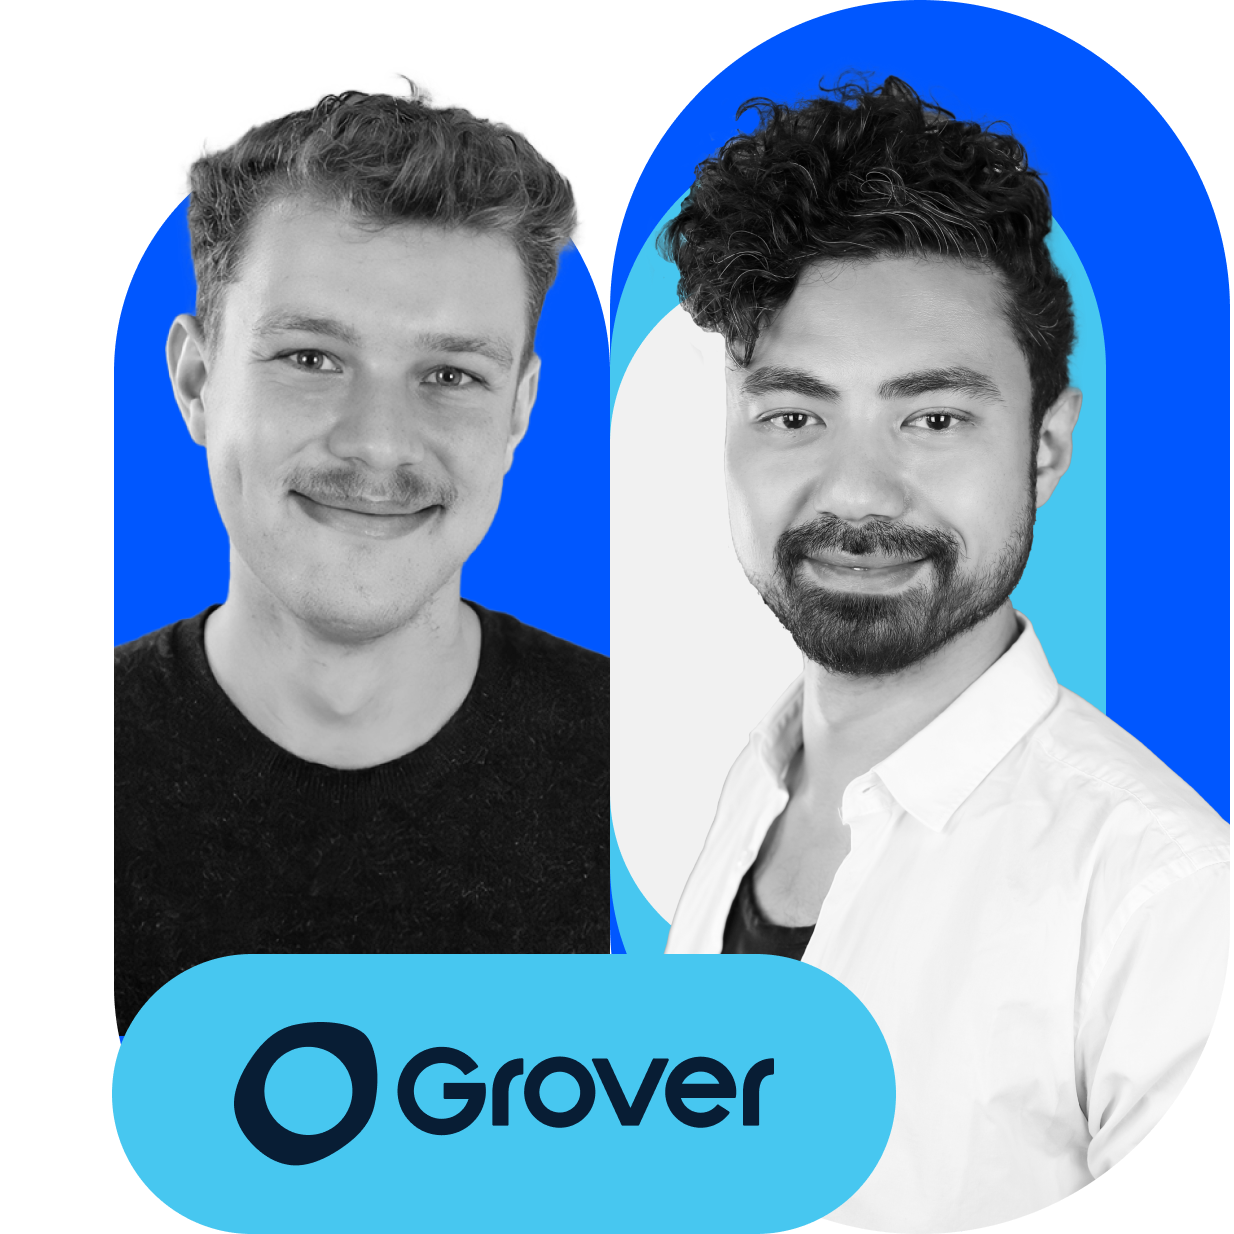 Grover reduced their first-response time by 79% with bots and automation